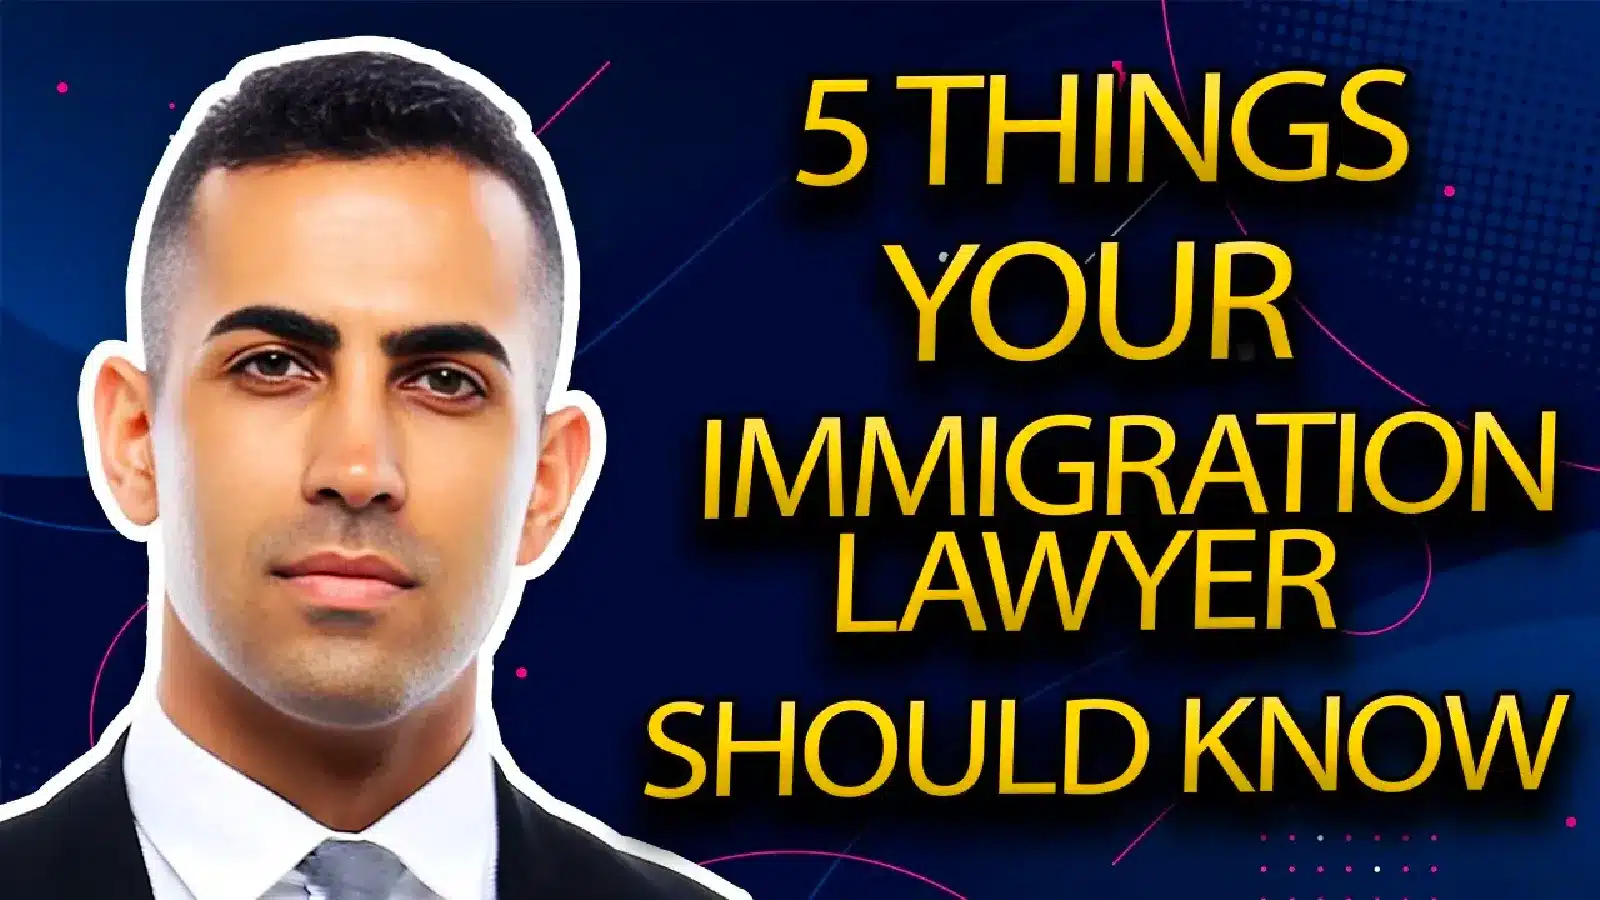 5 Things Your Immigration Lawyer Should Know To Help Your Case